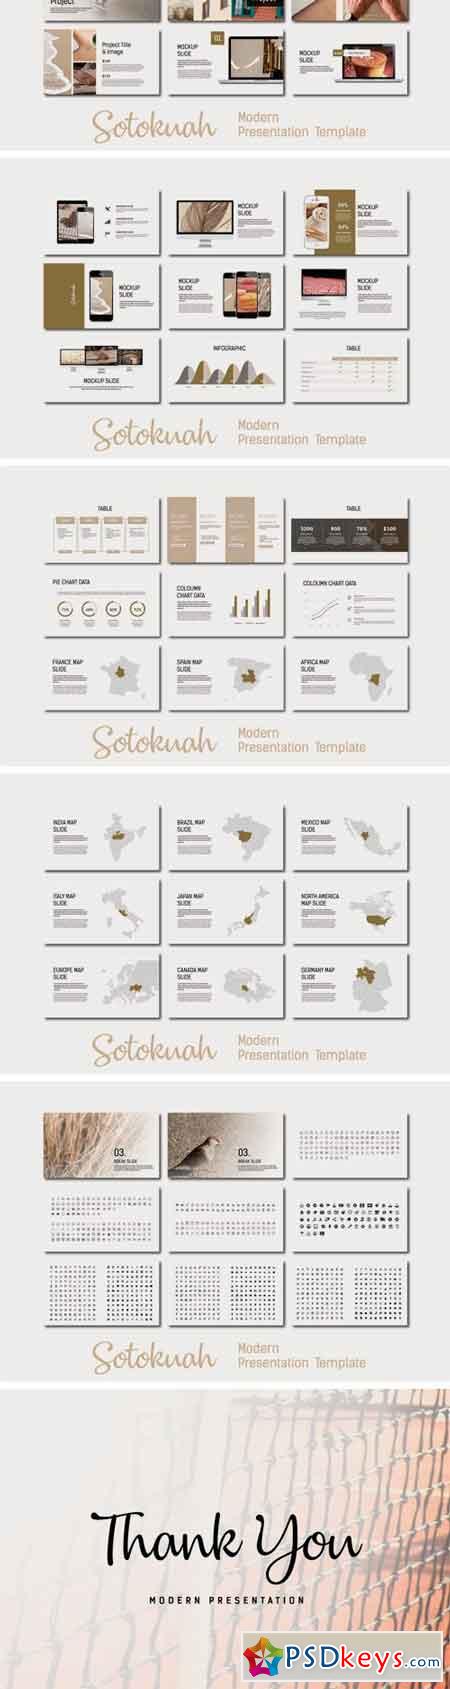 Sotokuah Powerpoint Template 2248850